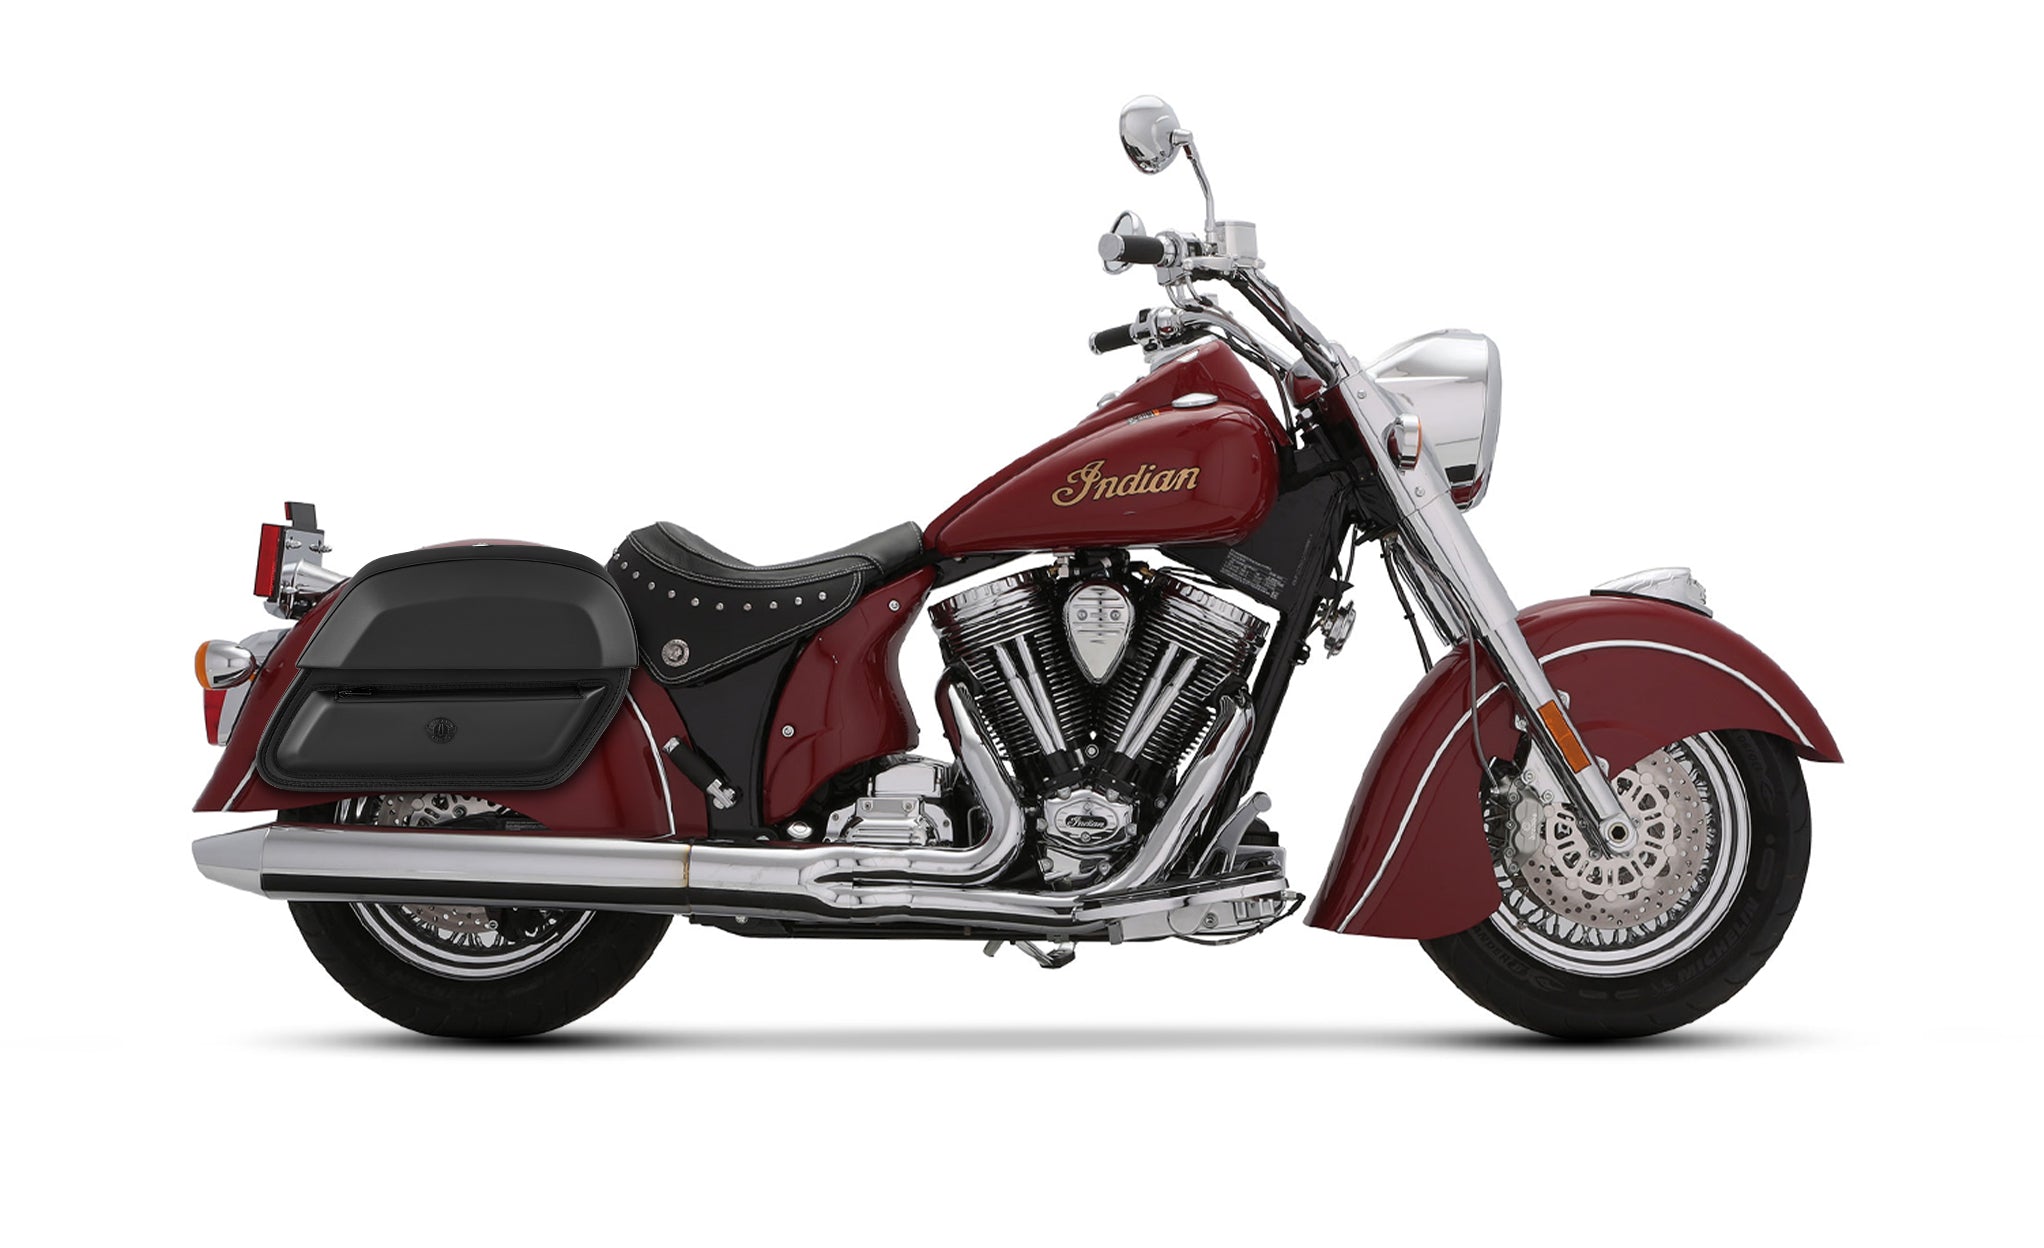 28L - Wraith Medium Indian Chief Deluxe Leather Motorcycle Saddlebags BAG on Bike View @expand